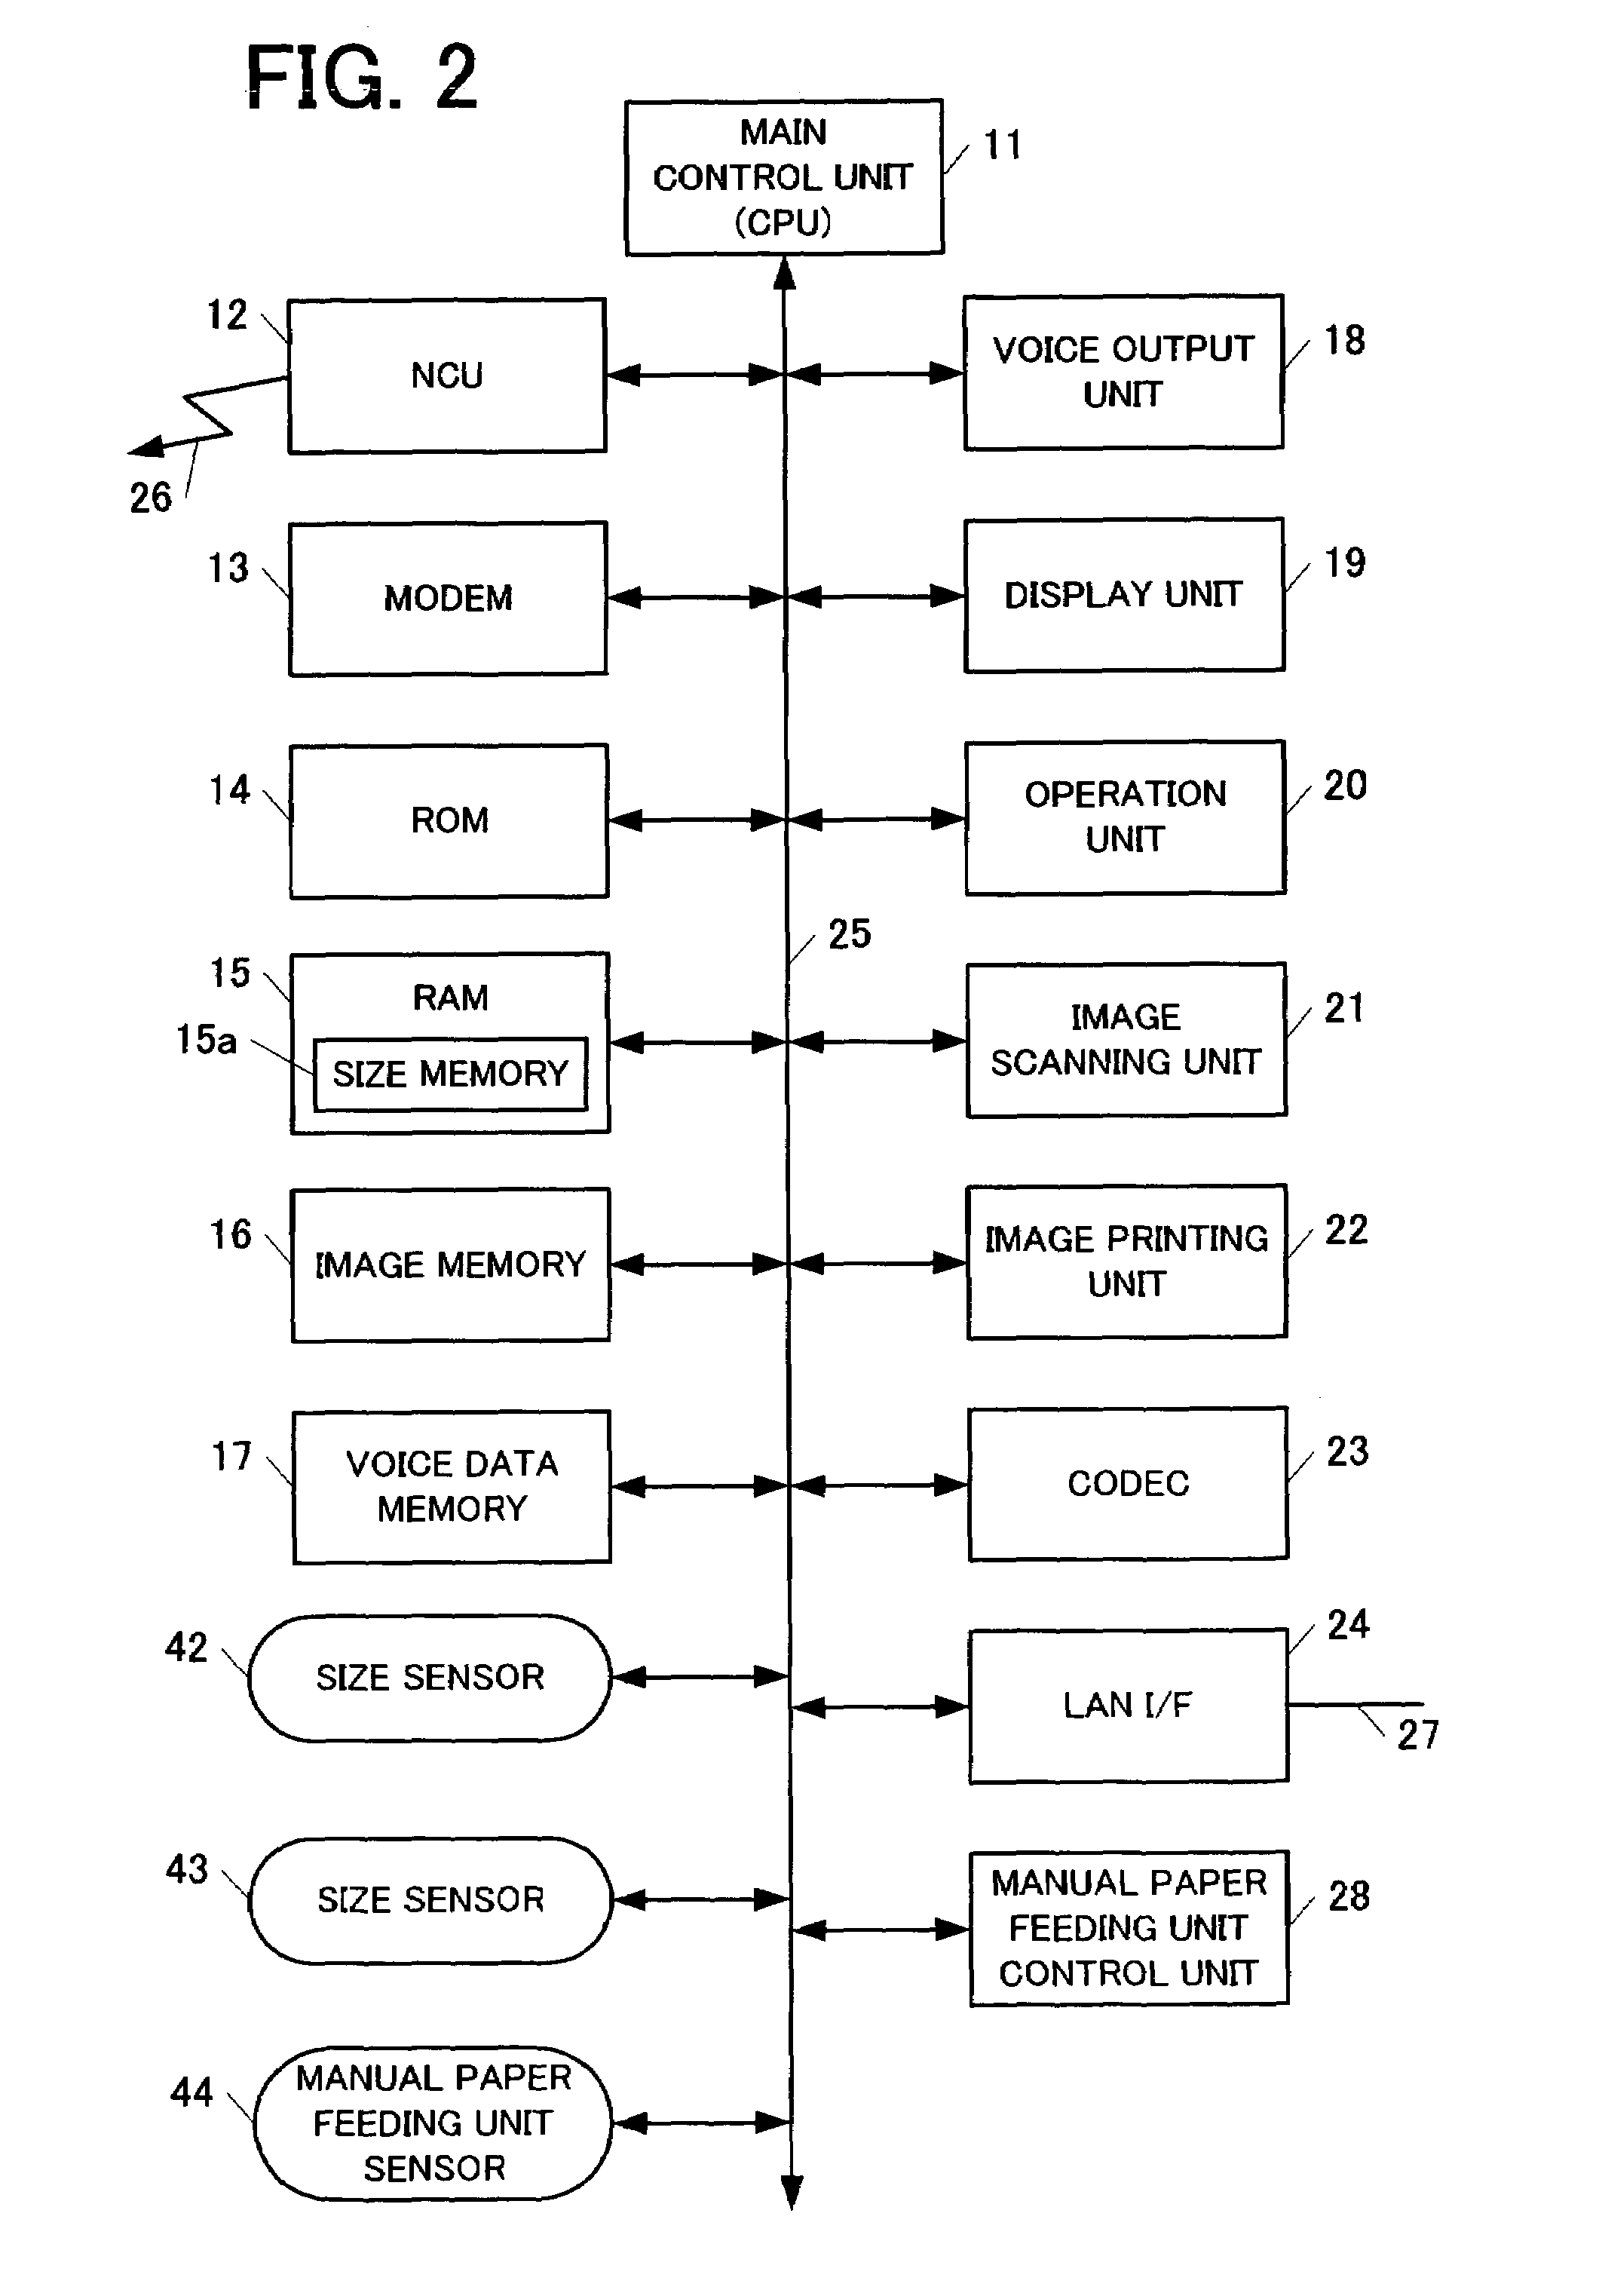 Printing device with manual paper feeding function